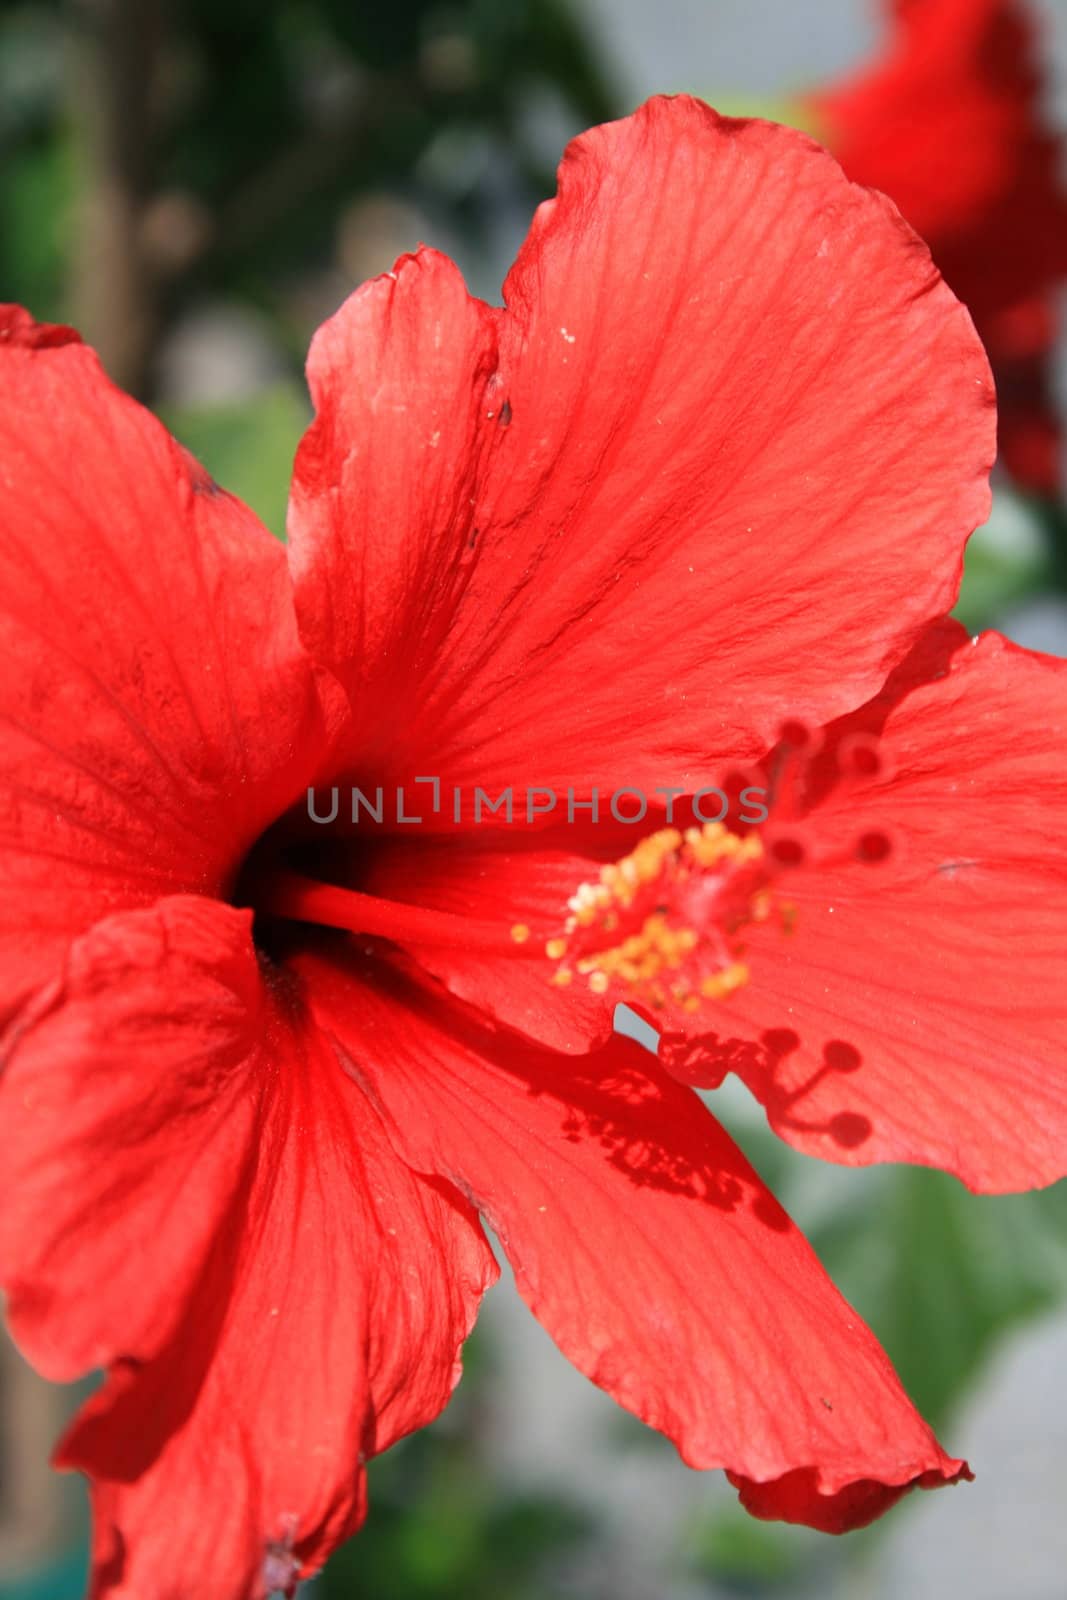 Red hibiscus flower close up on a sunny day.
